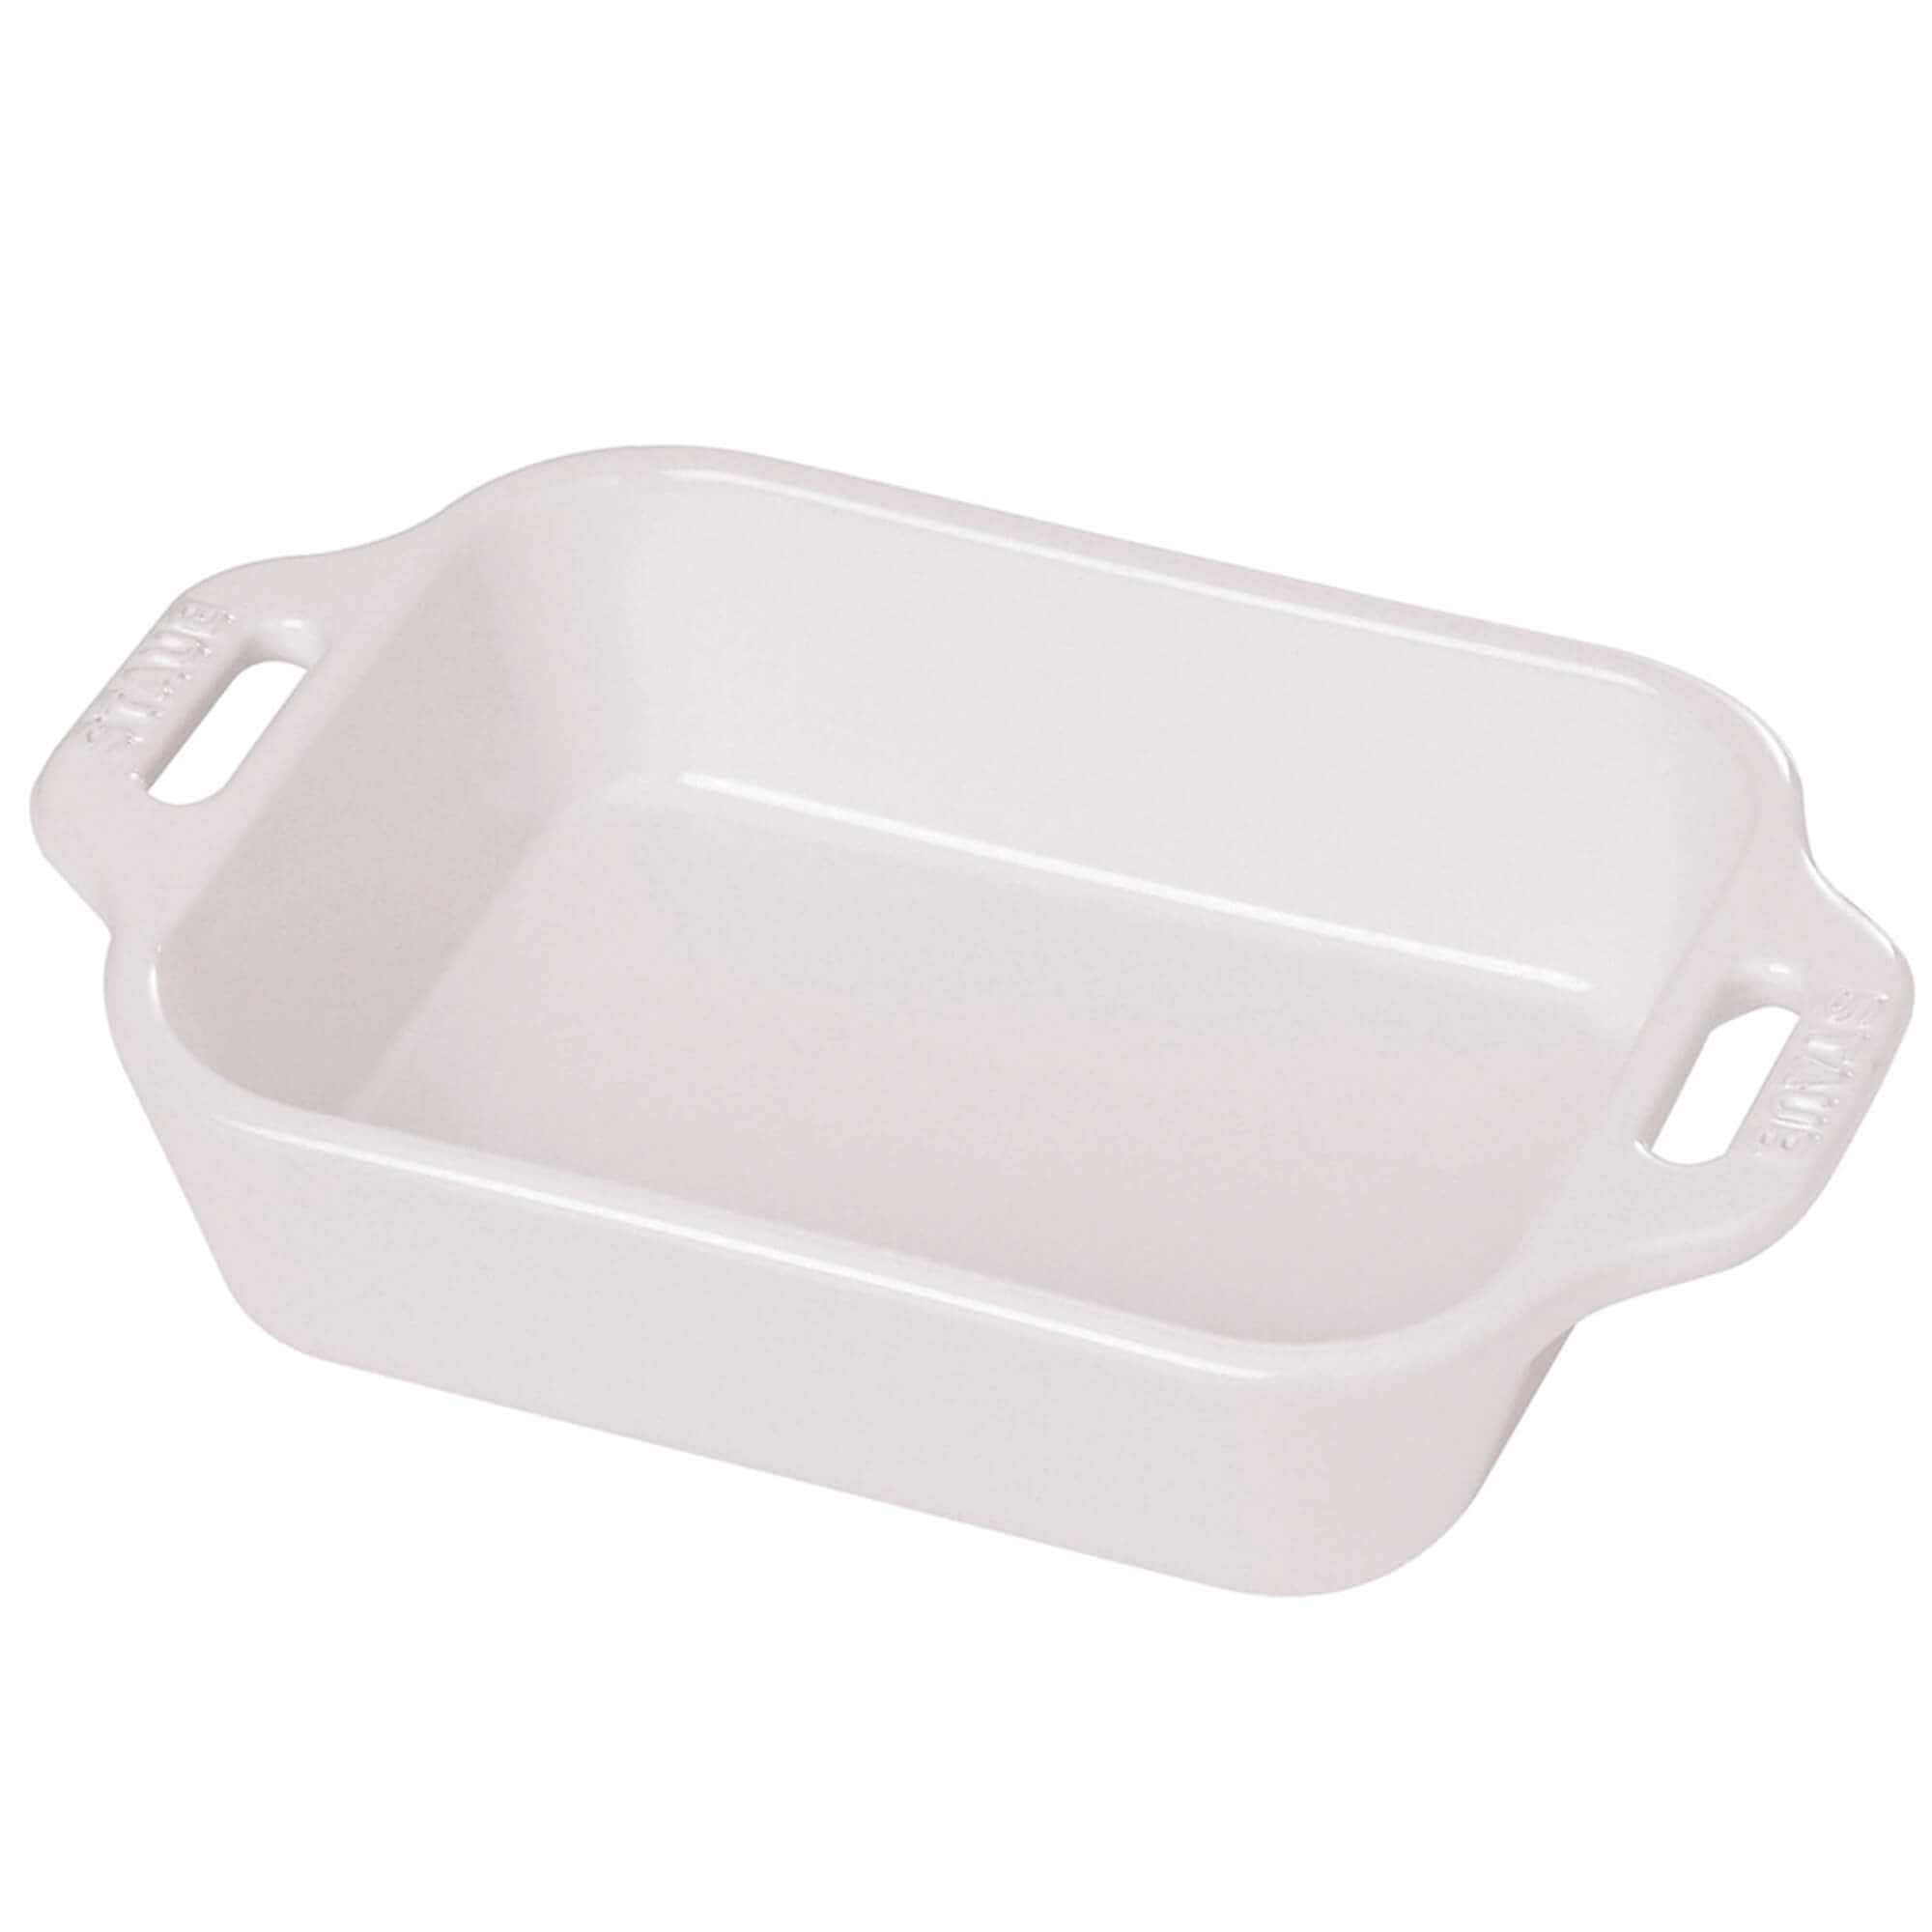 https://ak1.ostkcdn.com/images/products/is/images/direct/e378e1353d0582c41e68ccf6d13d31da90ec6bc1/STAUB-Ceramic-13-inch-x-9-inch-Rectangular-Baking-Dish.jpg